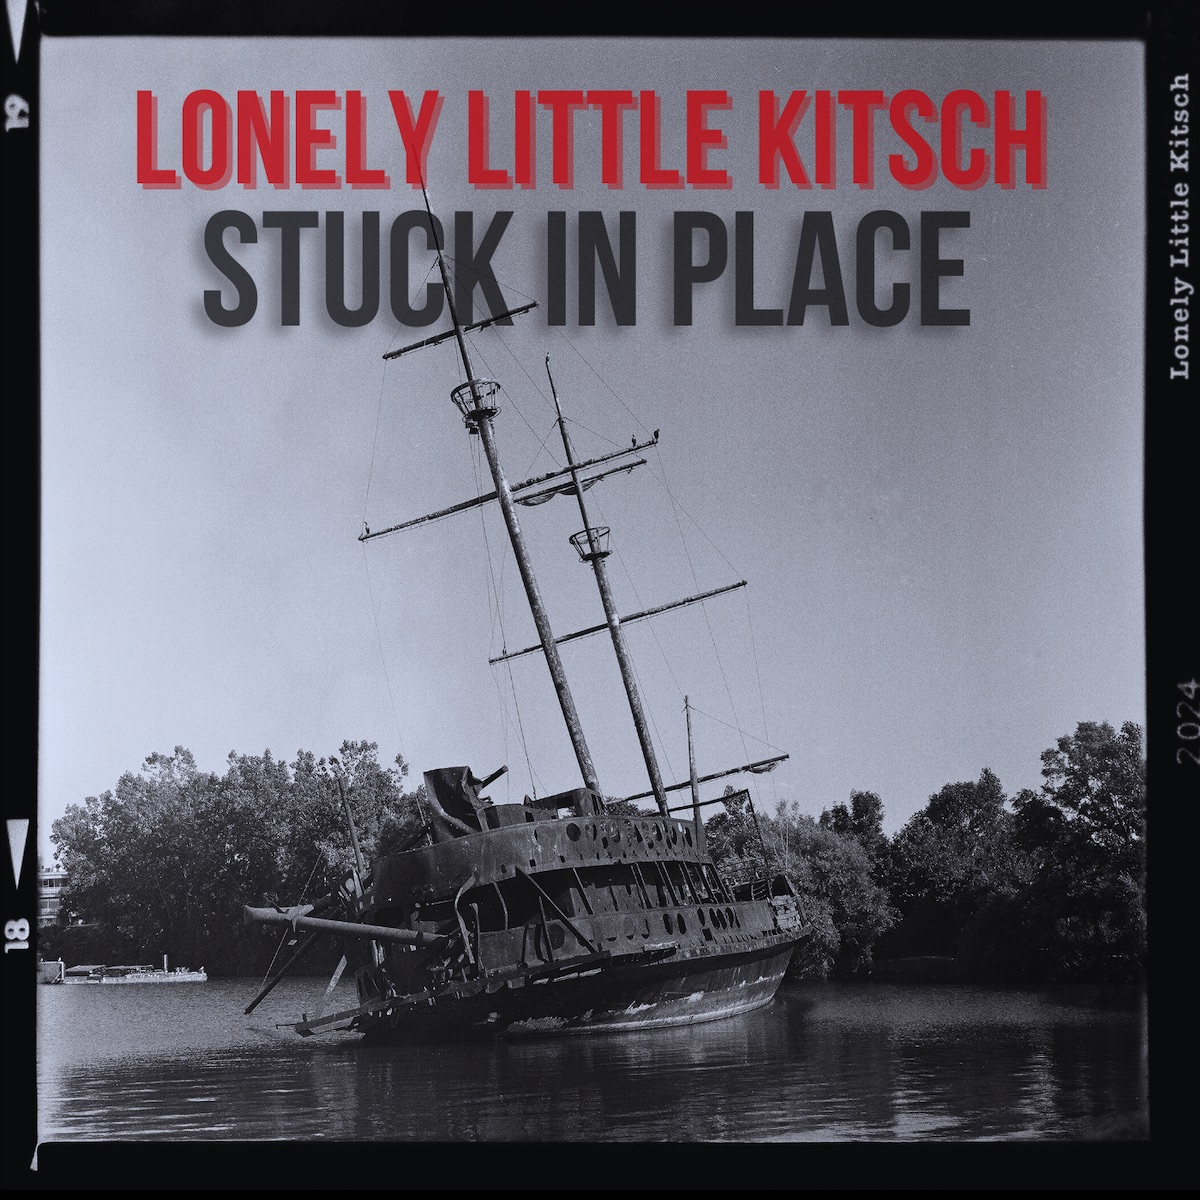 LISTEN: “Stuck In Place” by Lonely Little Kitsch